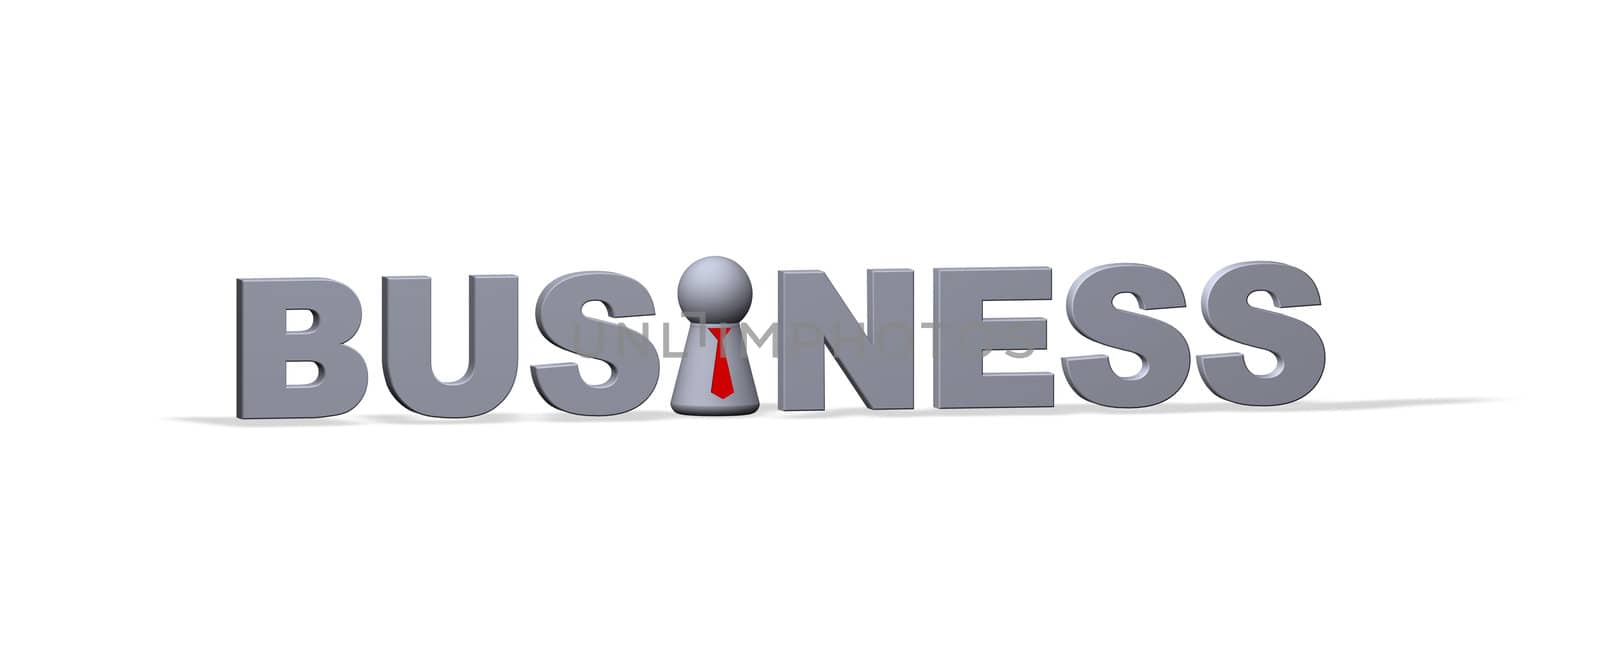 business text in 3d and play figure with red tie